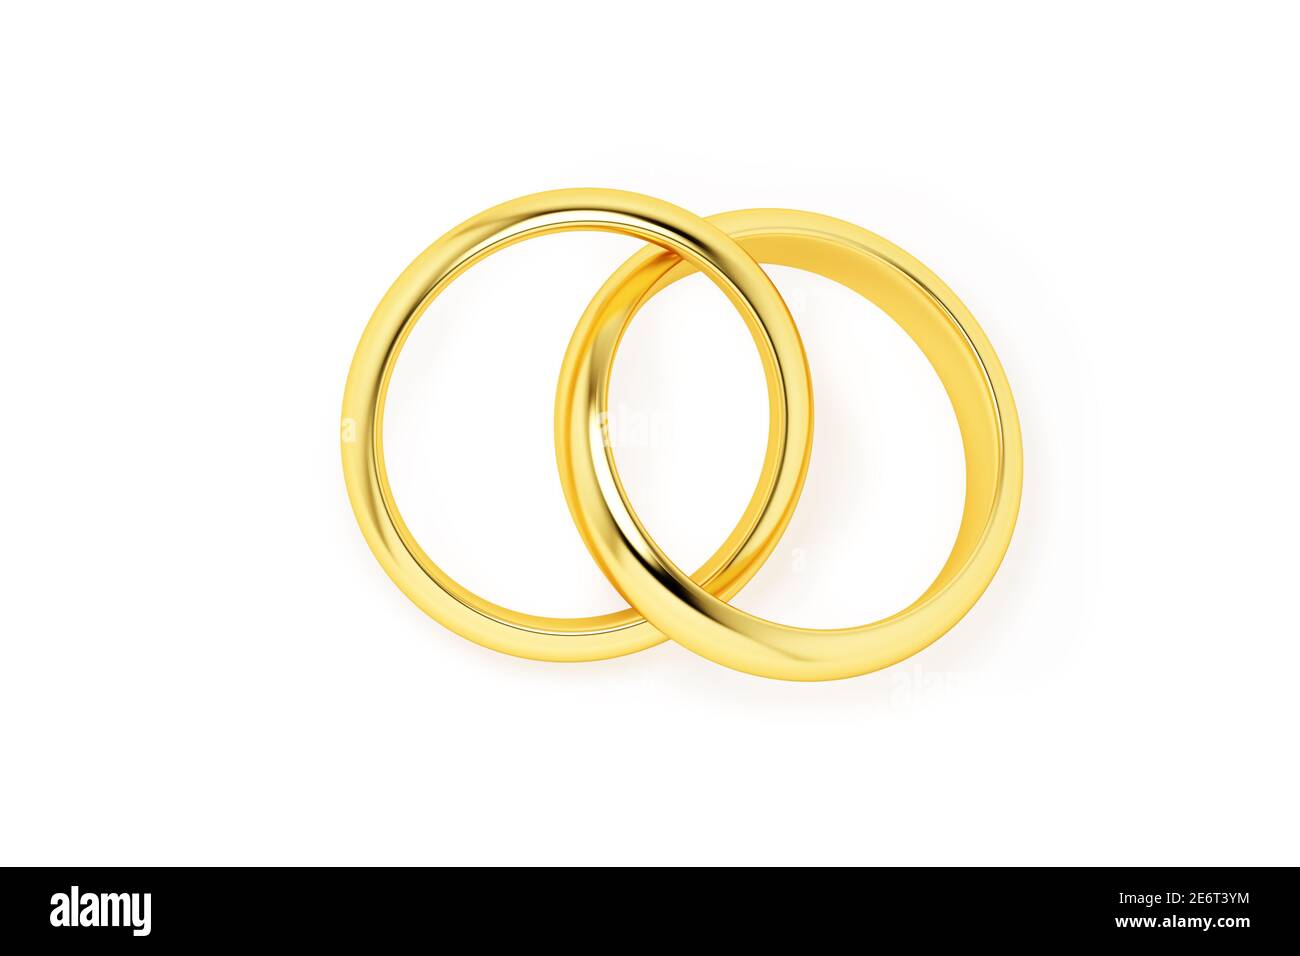 Two intertwined golden wedding rings isolated on a white background. Stock Photo